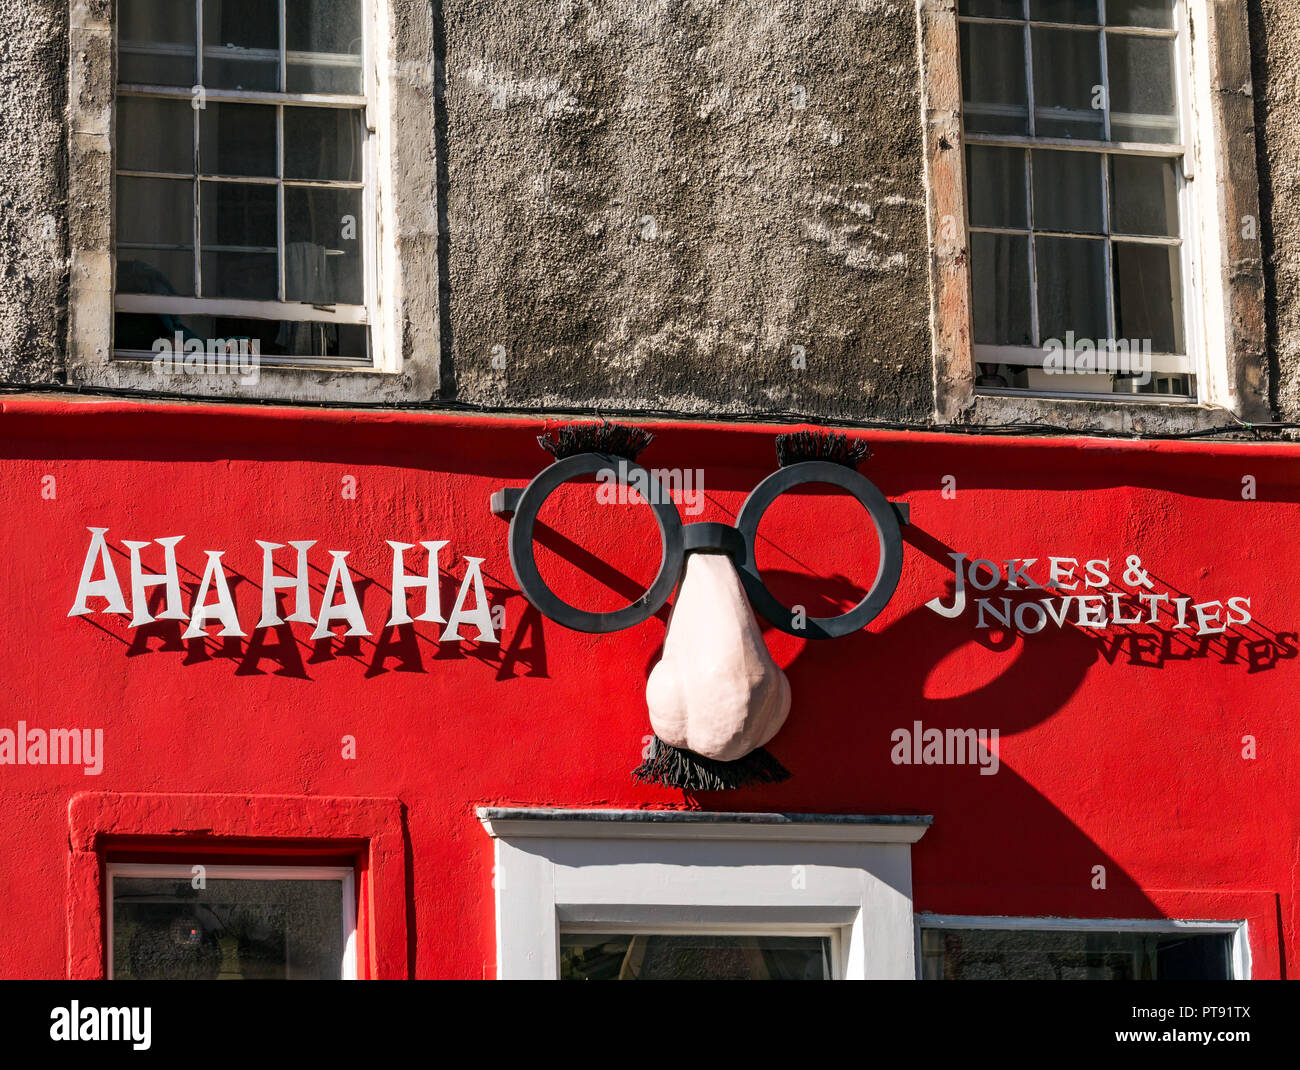 Frontage of joke and novelty shop called Aha ha ha with funny big nose and spectacles, West Bow, Edinburgh, Scotland, UK Stock Photo